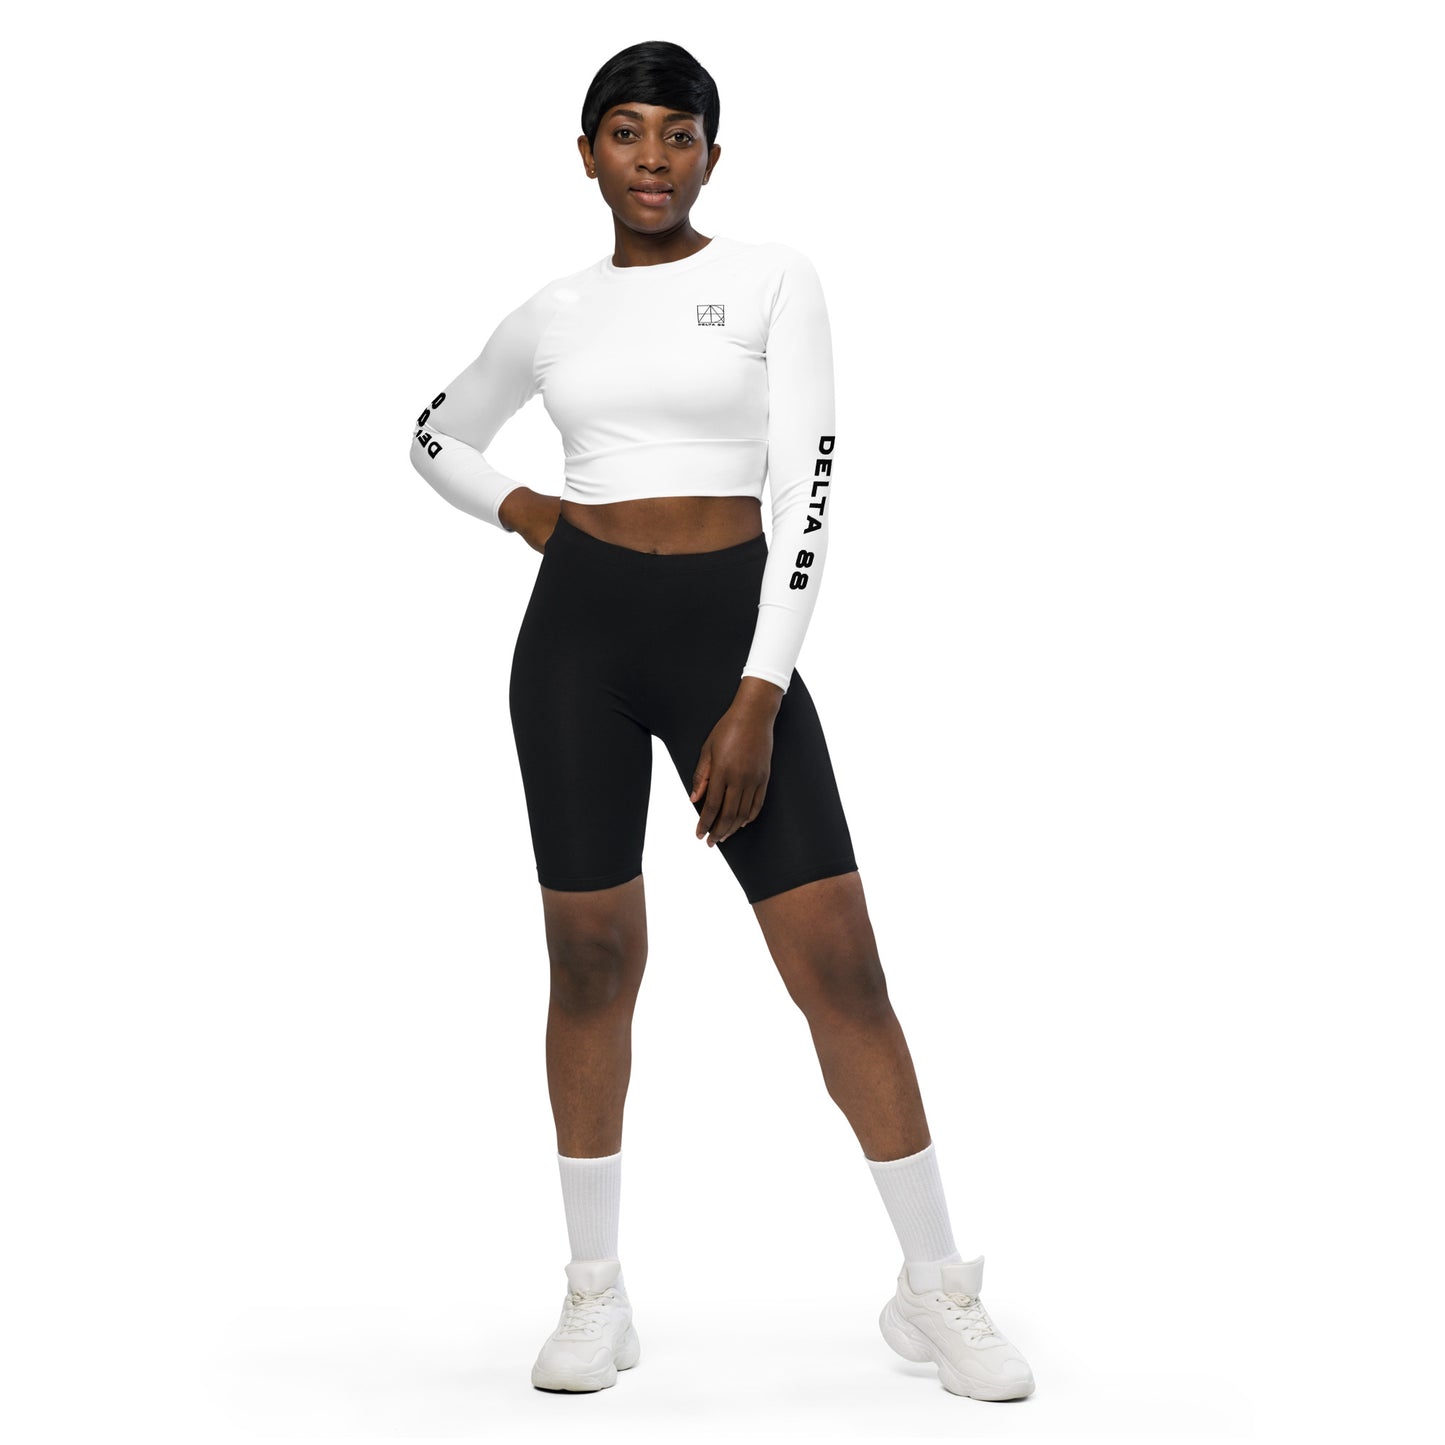 Delta 88 Recycled Athletic crop top